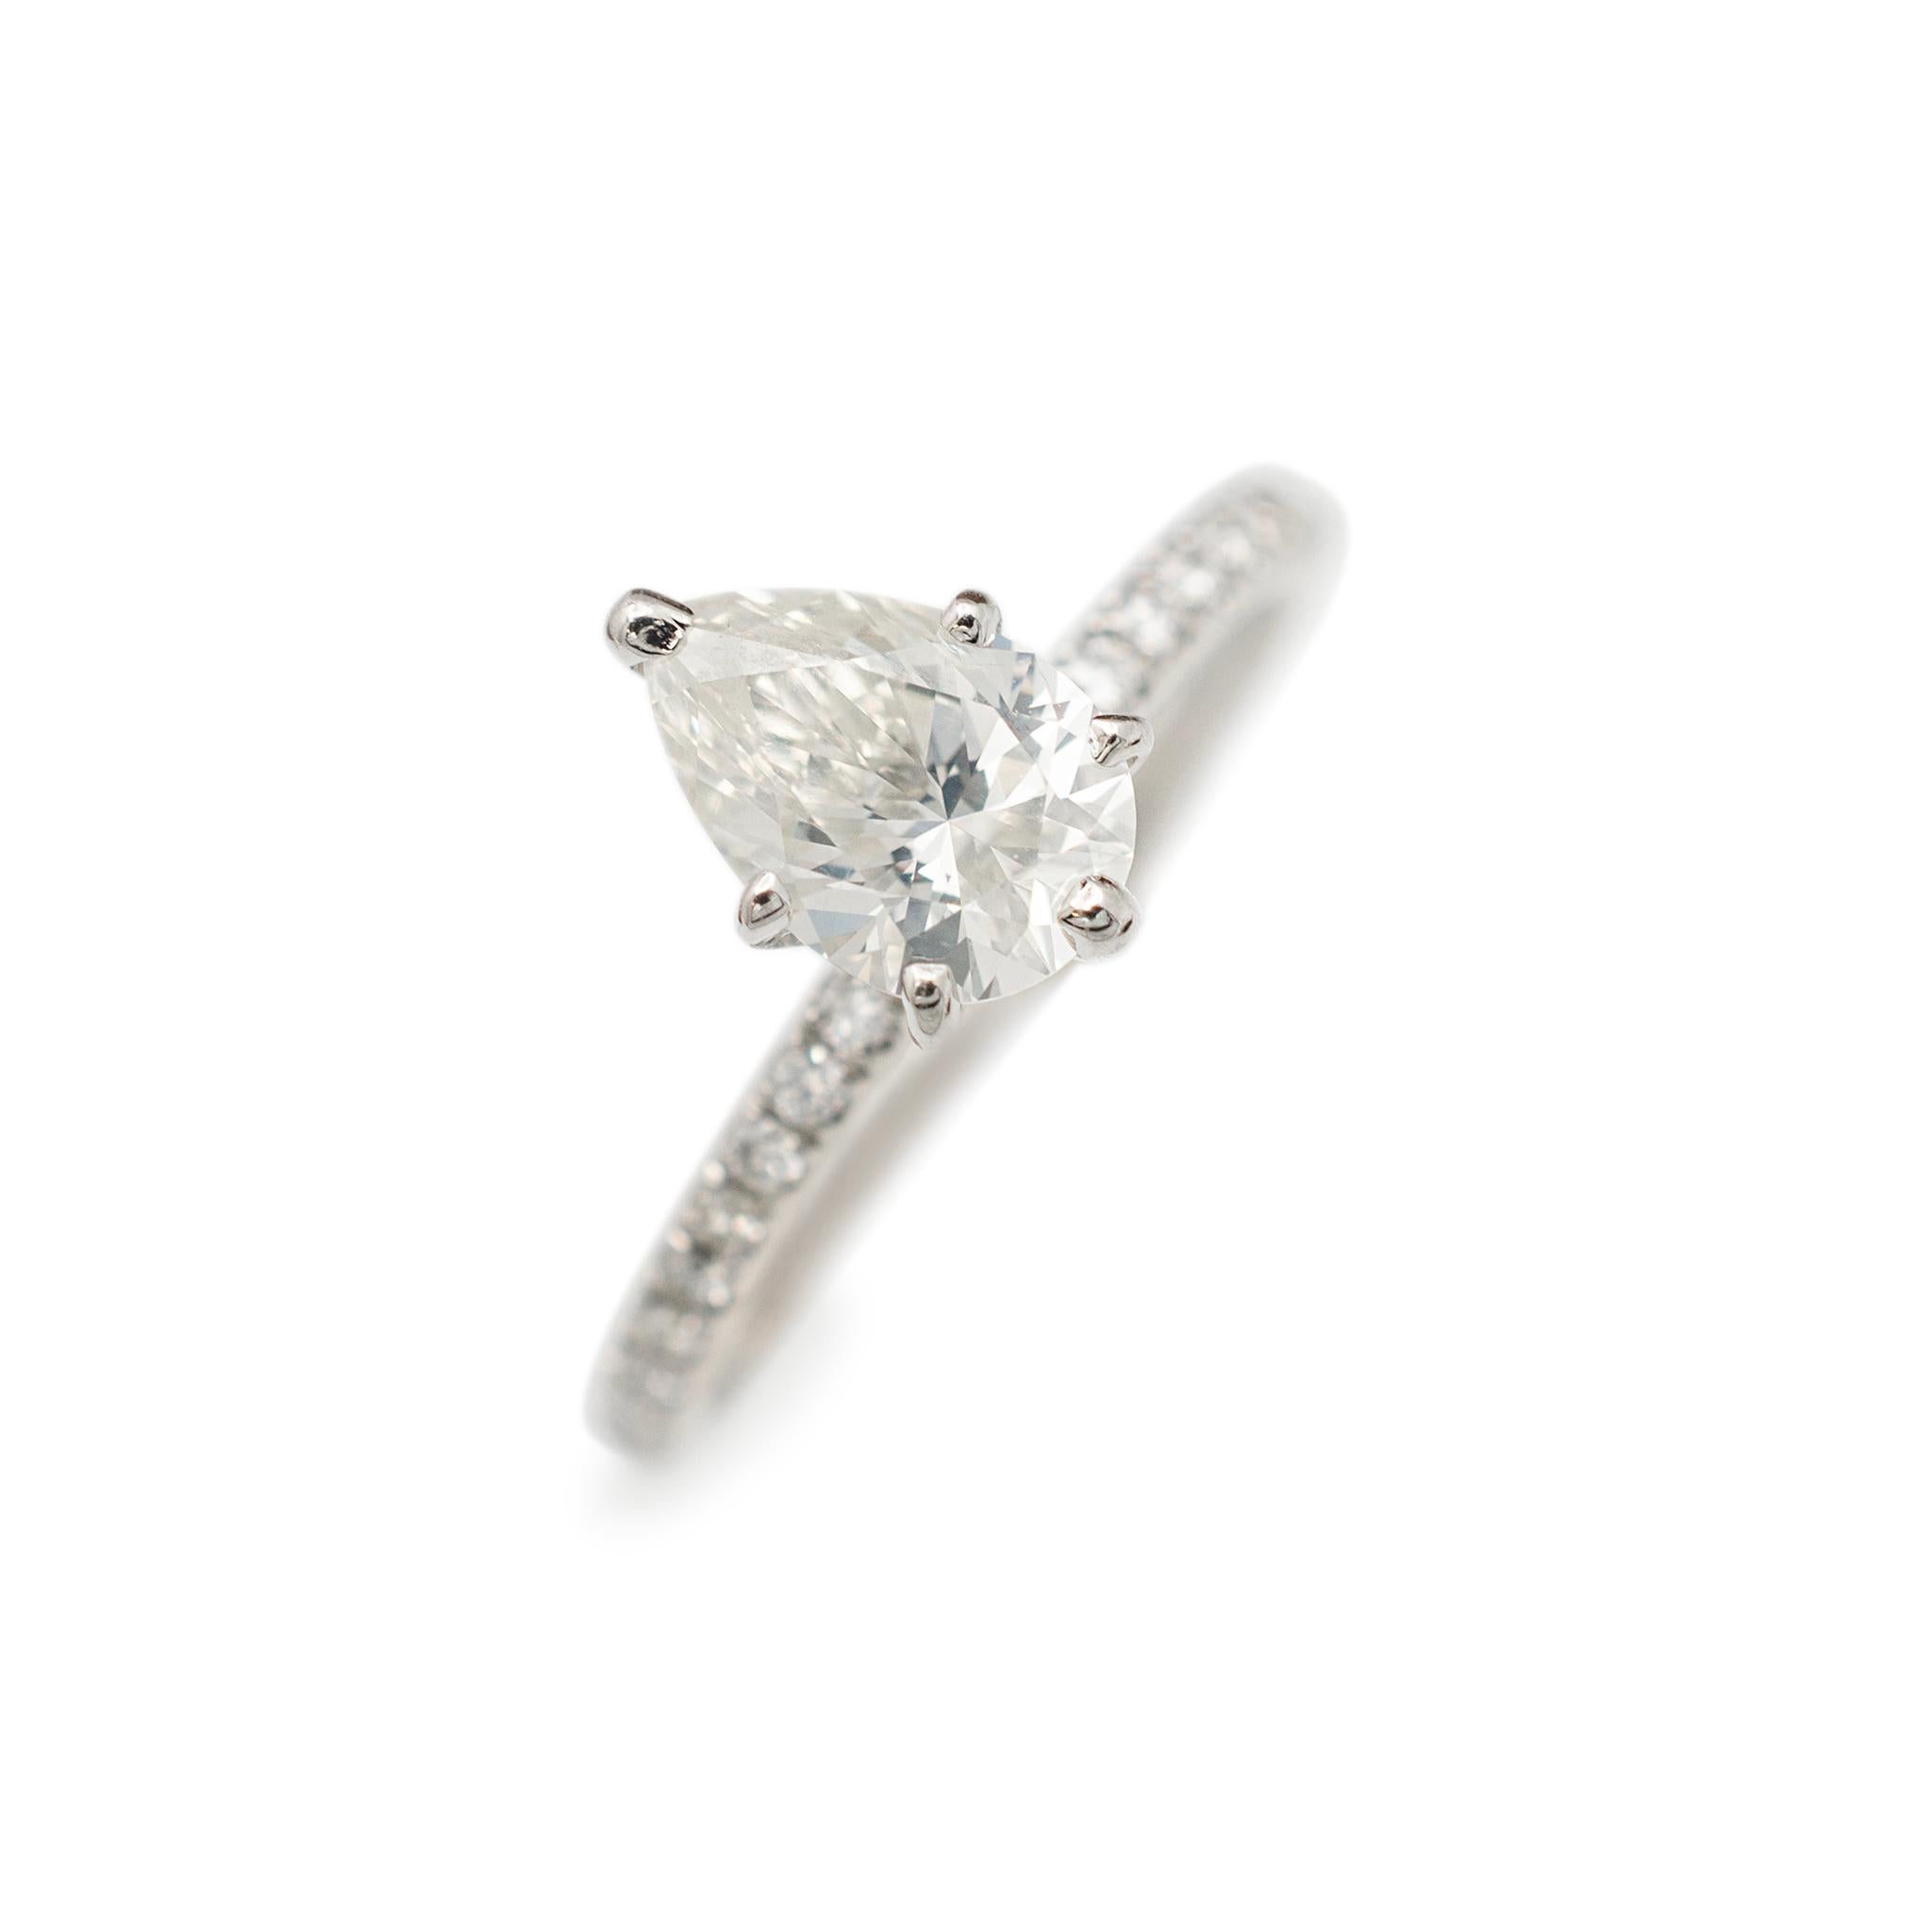 Gender: Ladies

Metal Type: 14K White Gold

Size: 5.5

Shank Maximum Width: 1.75 mm

Weight: 2.20 grams

Ladies 14K white gold diamond engagement ring with a half round shank. The metal was tested and determined to be 14K white gold. 

Pre-owned in